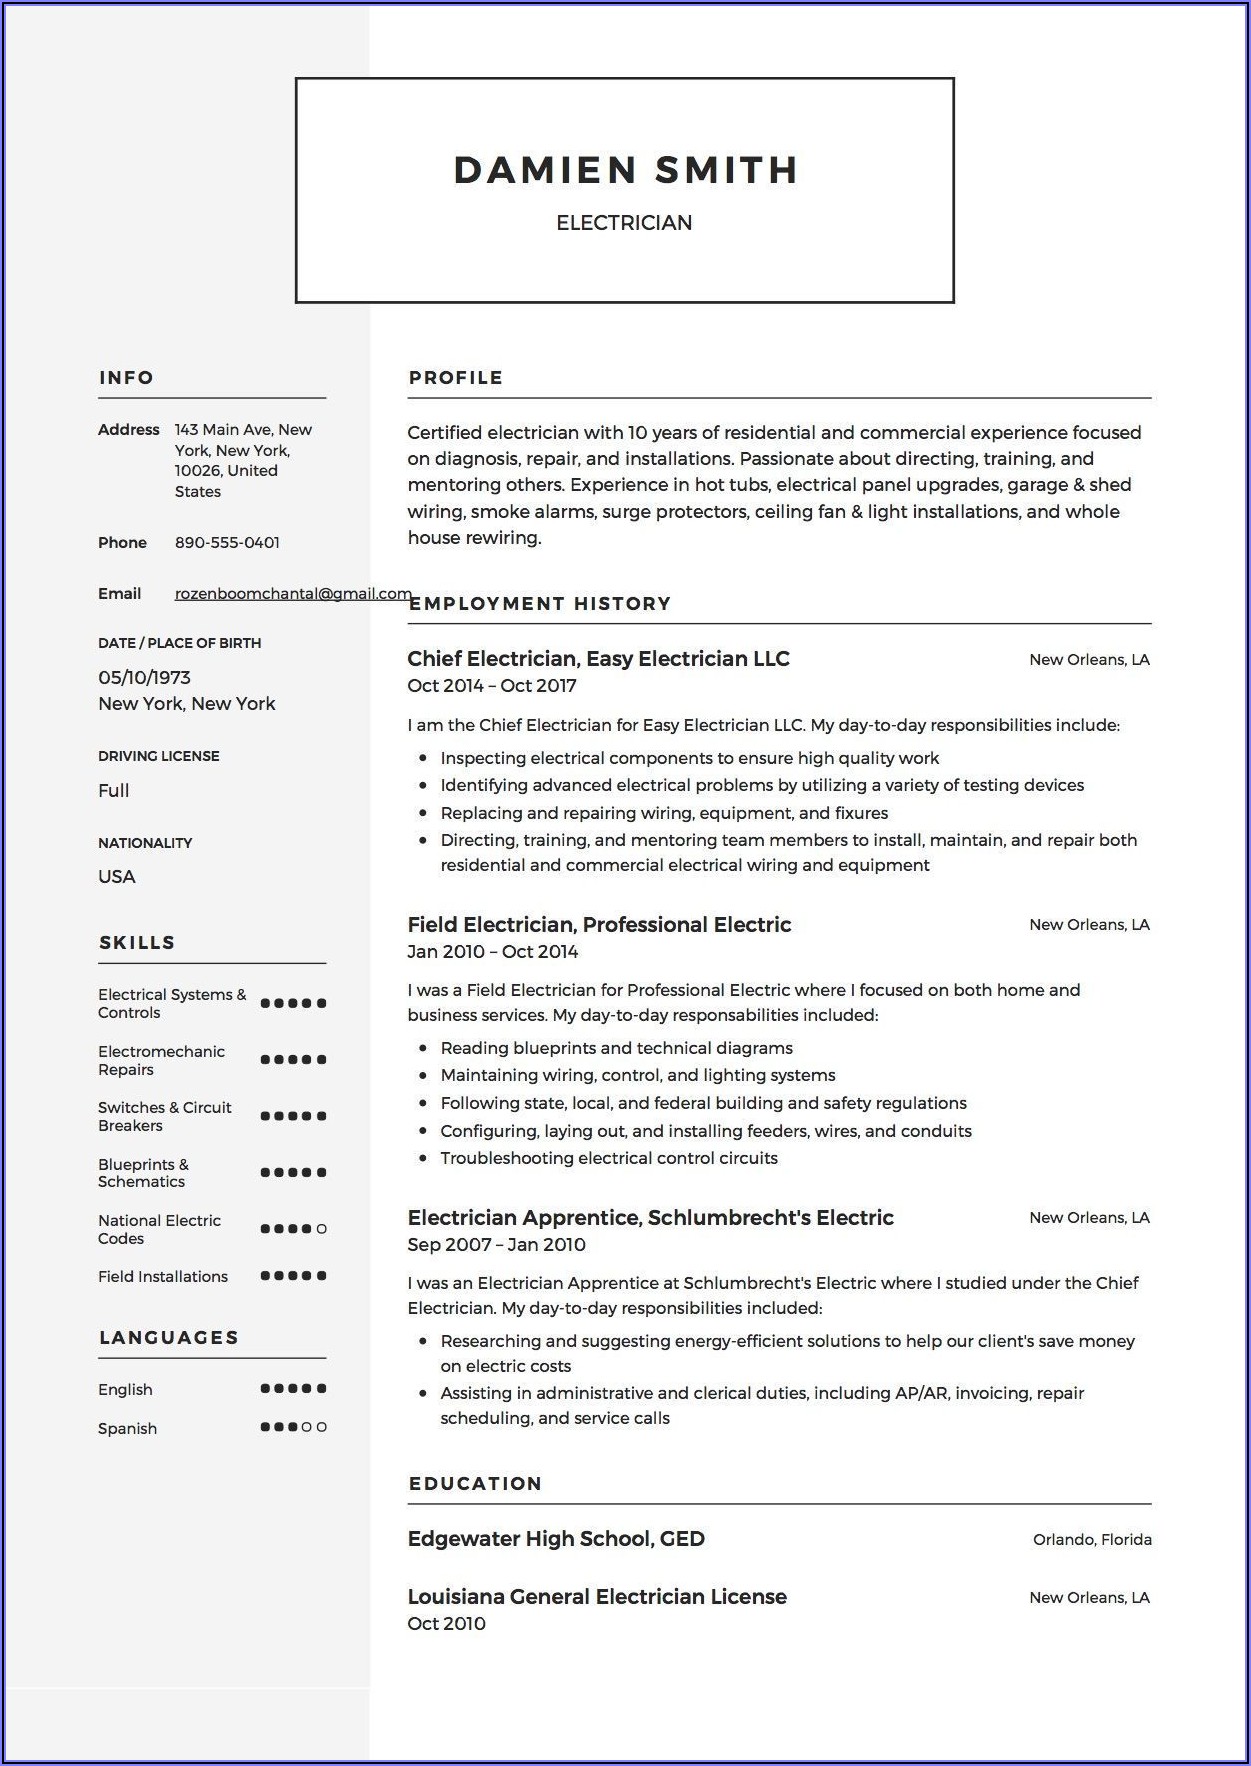 Resume Sample For Electrician